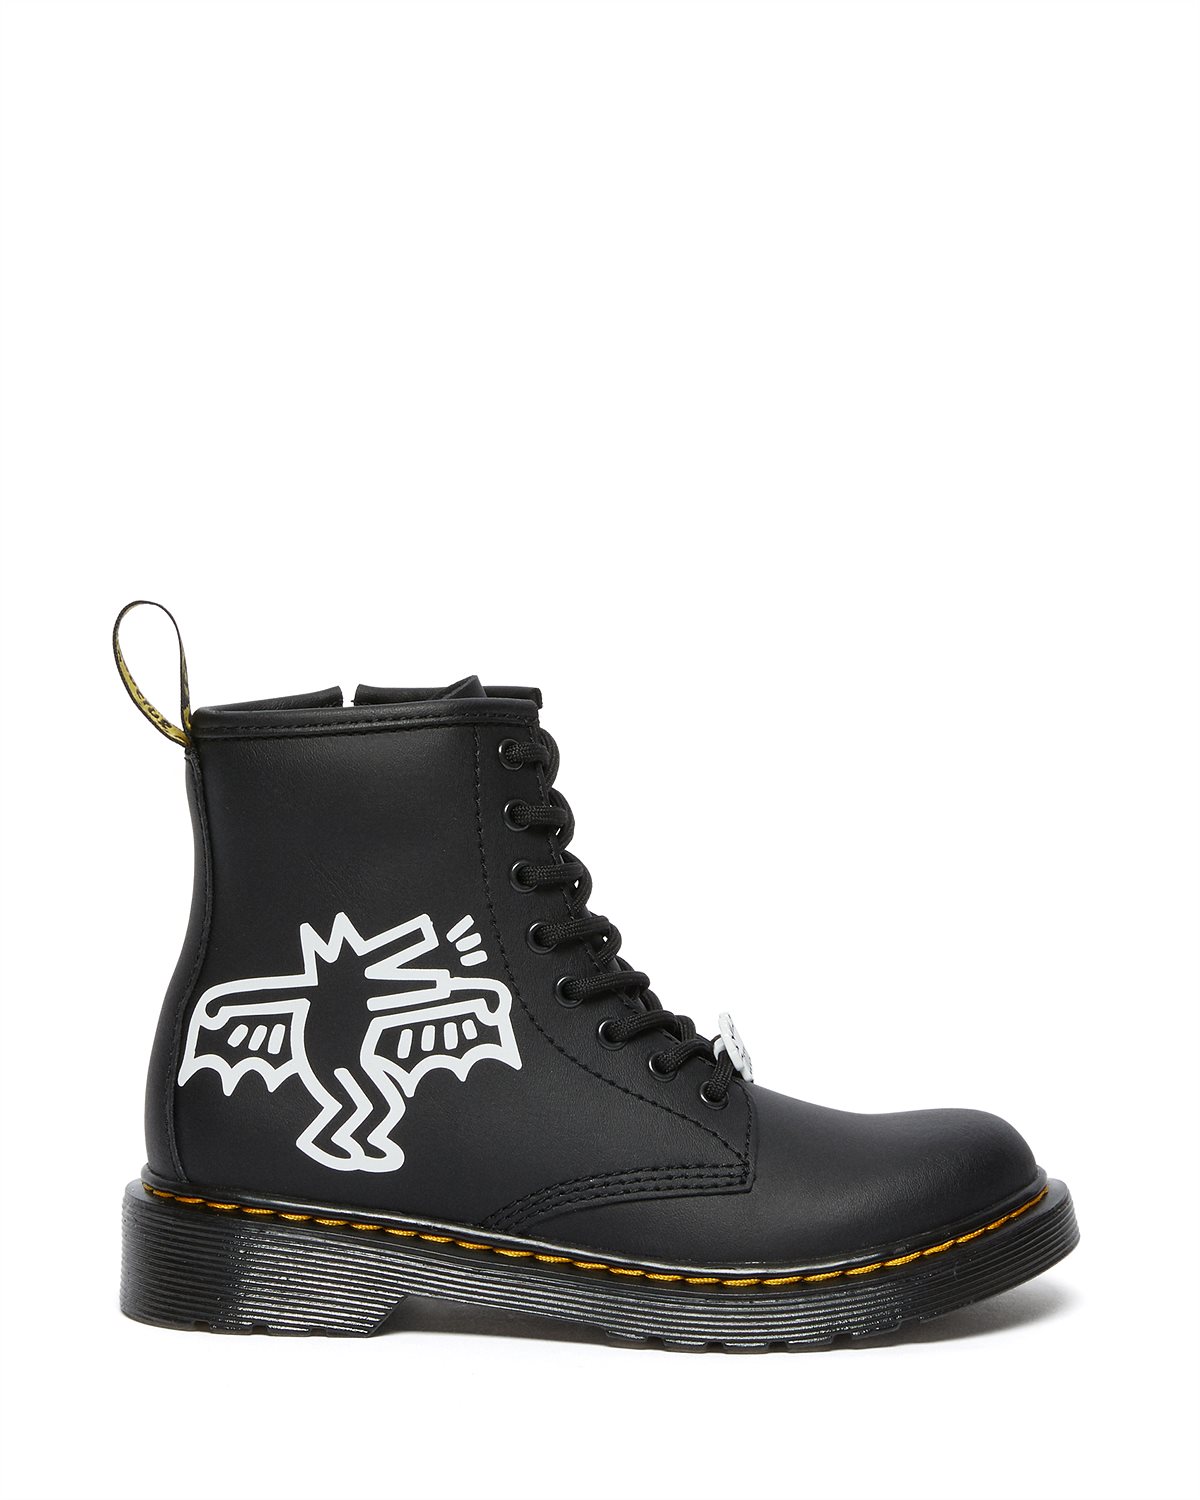 HUMANIC 11 Dr. Martens x Keith Haring Schnürboot EUR 4223507730